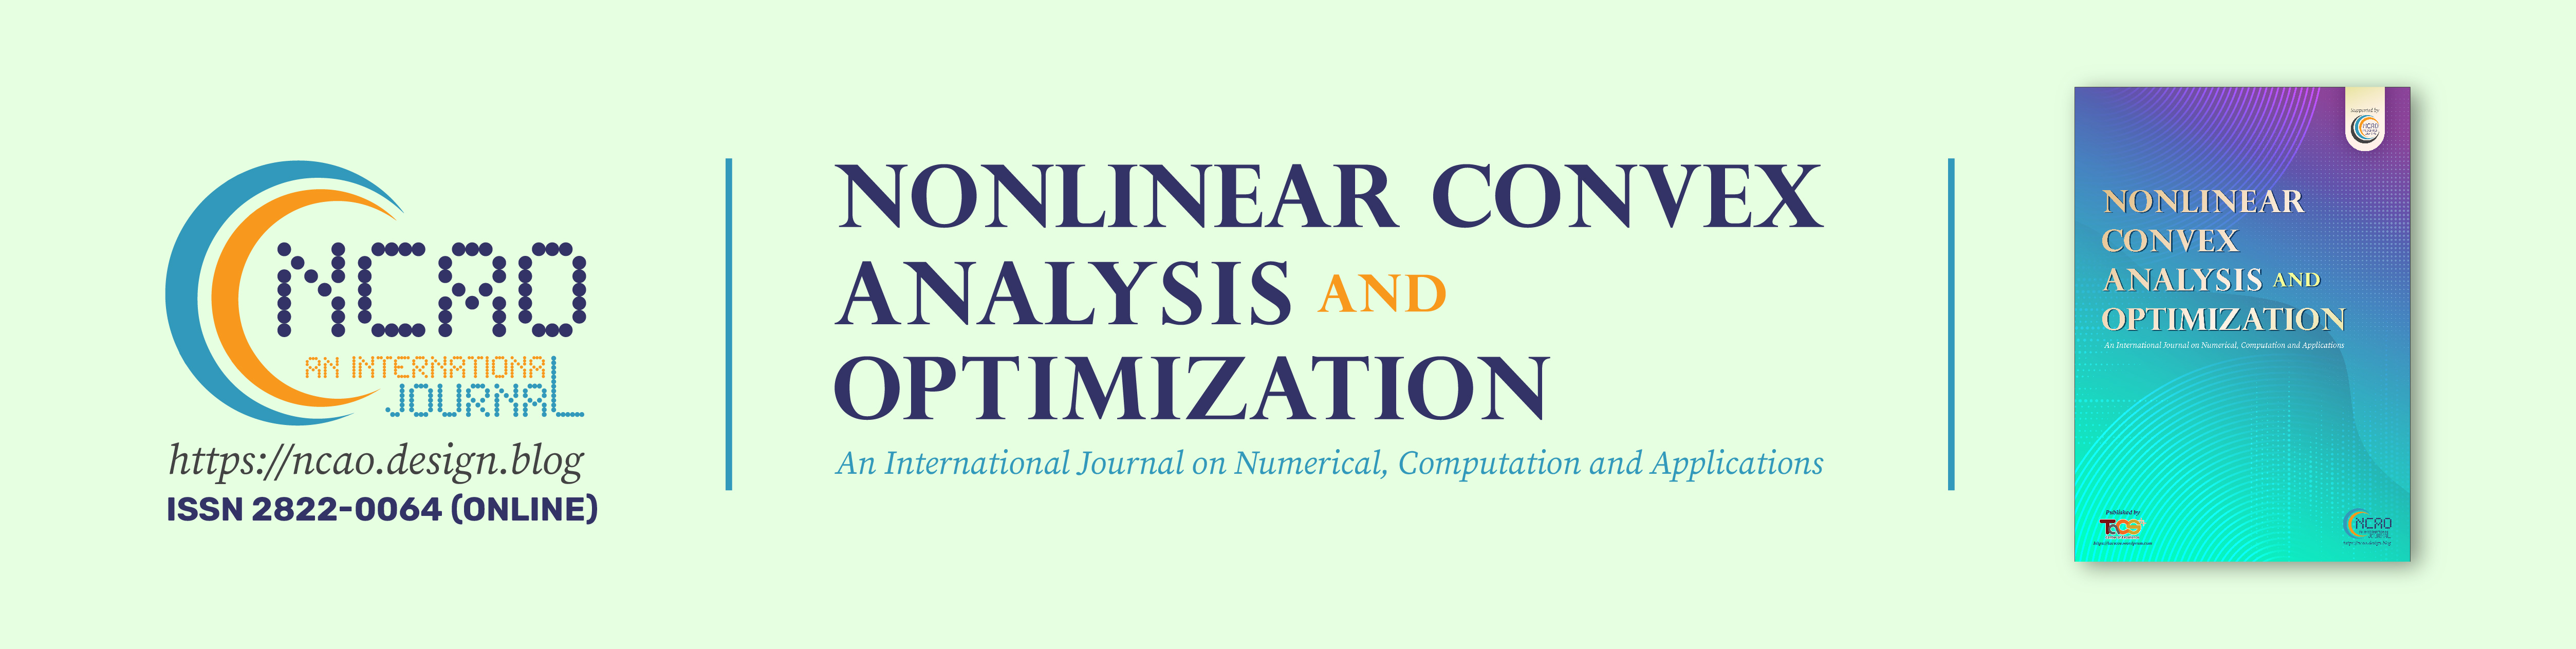 Nonlinear Convex Analysis and Optimization: